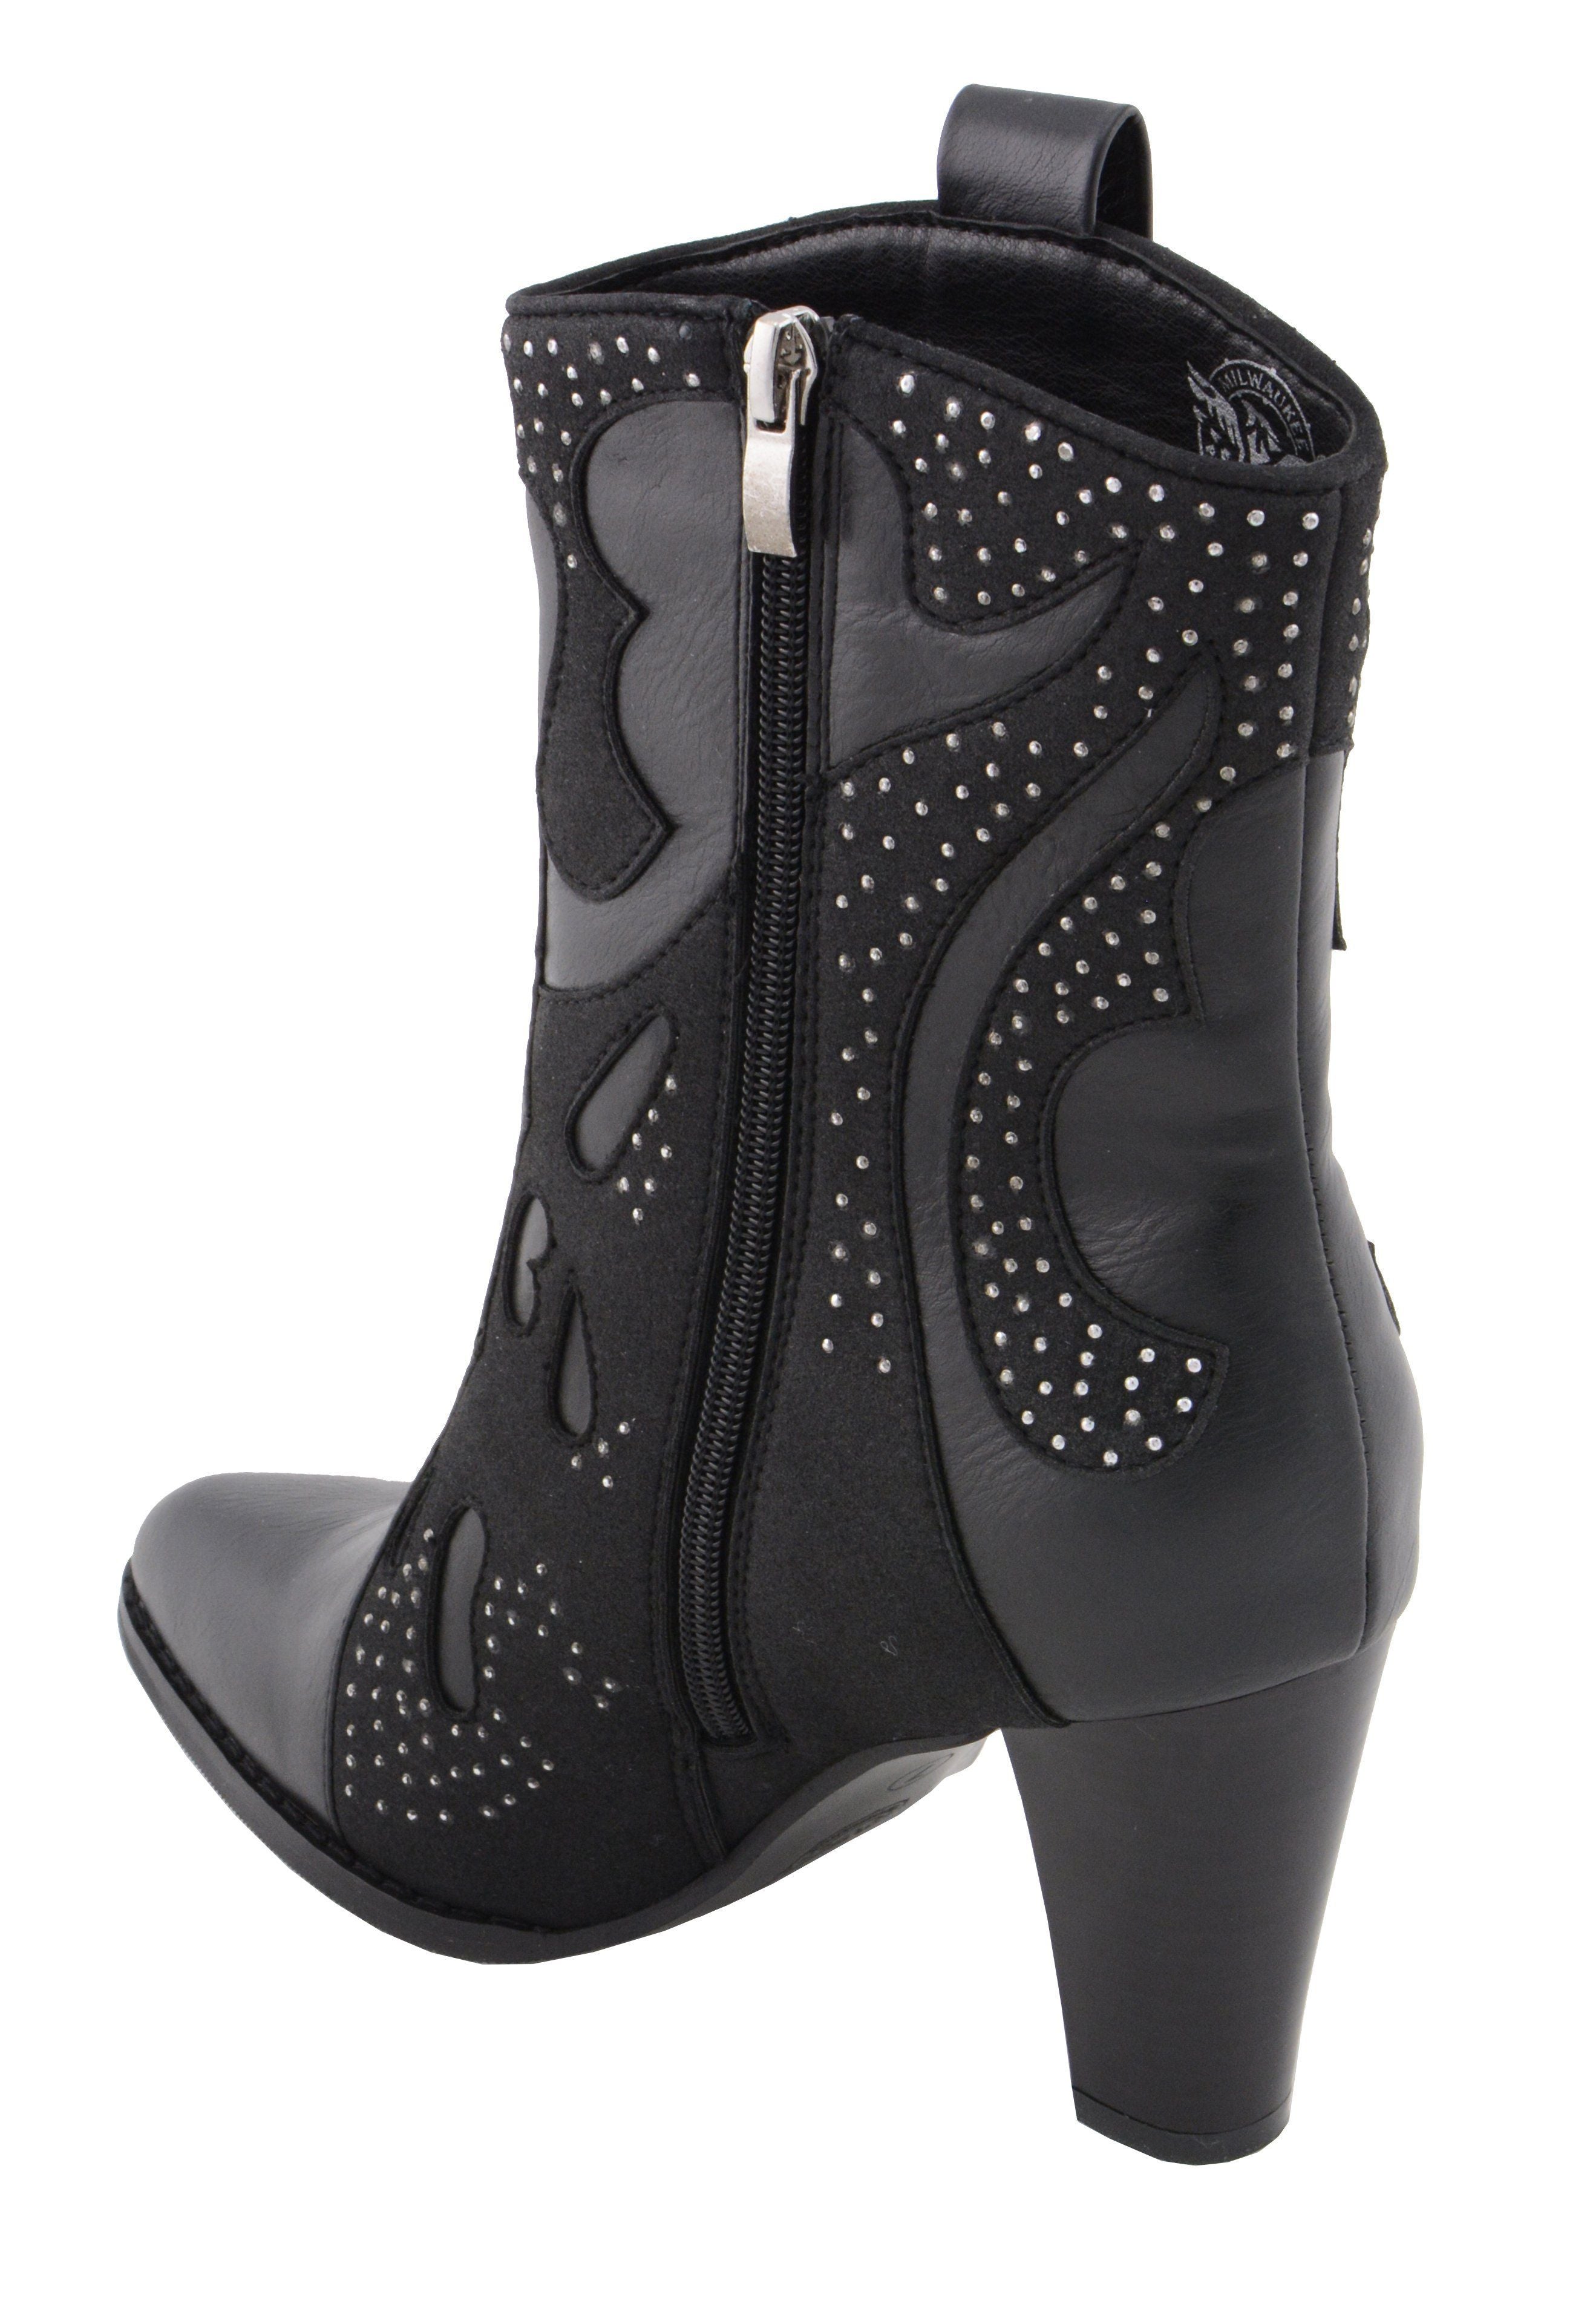 Milwaukee Performance MBL9429 Women's Black Western Style Boots with Studded Bling